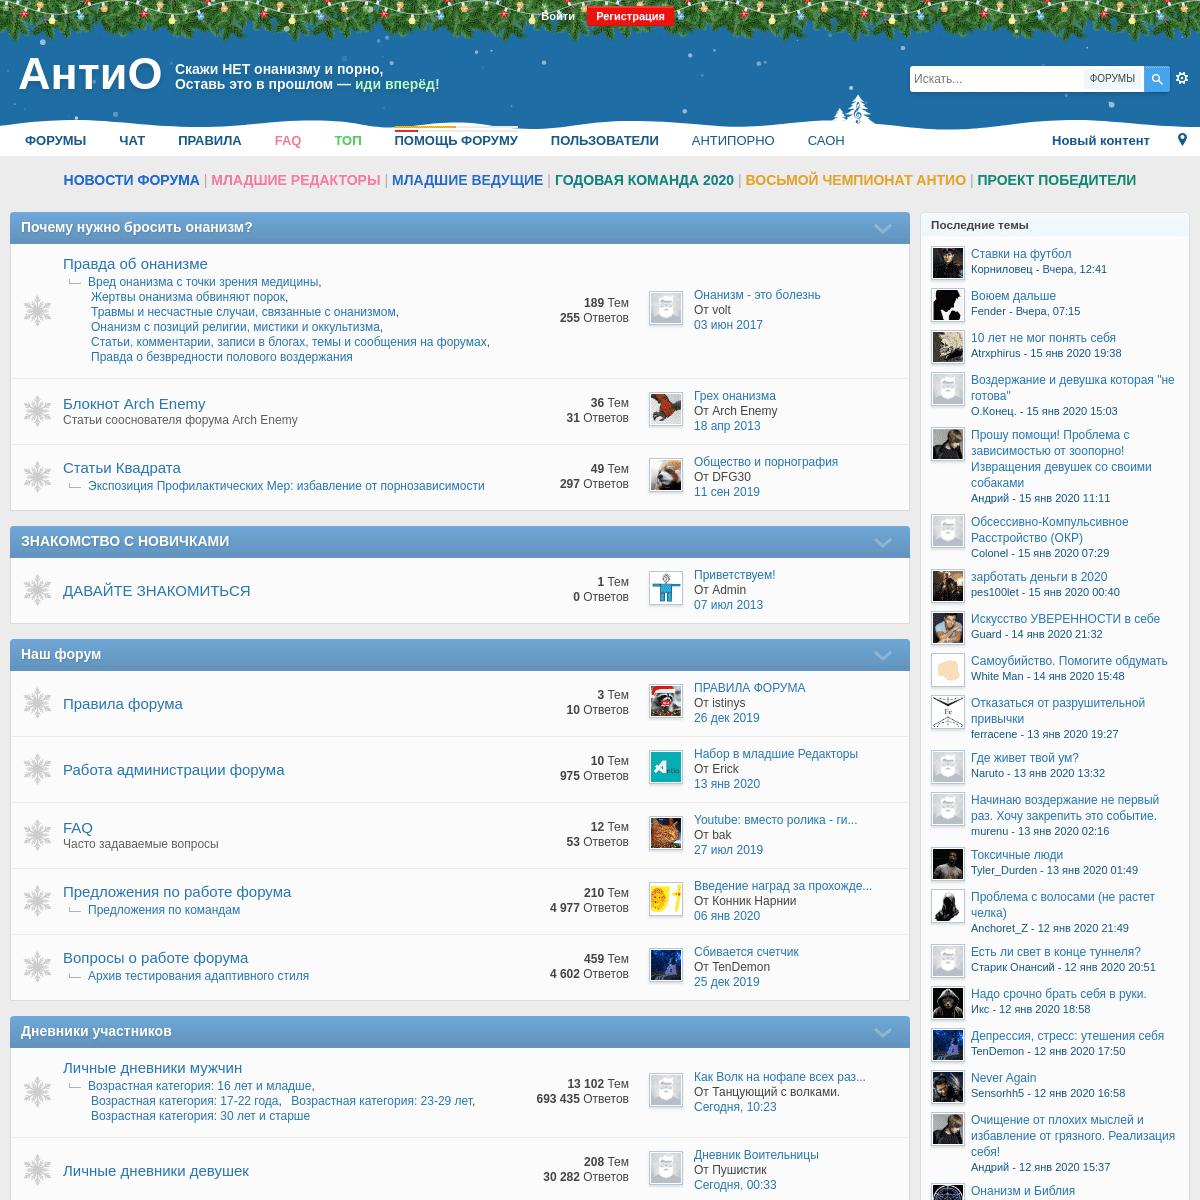 A complete backup of antio.ru